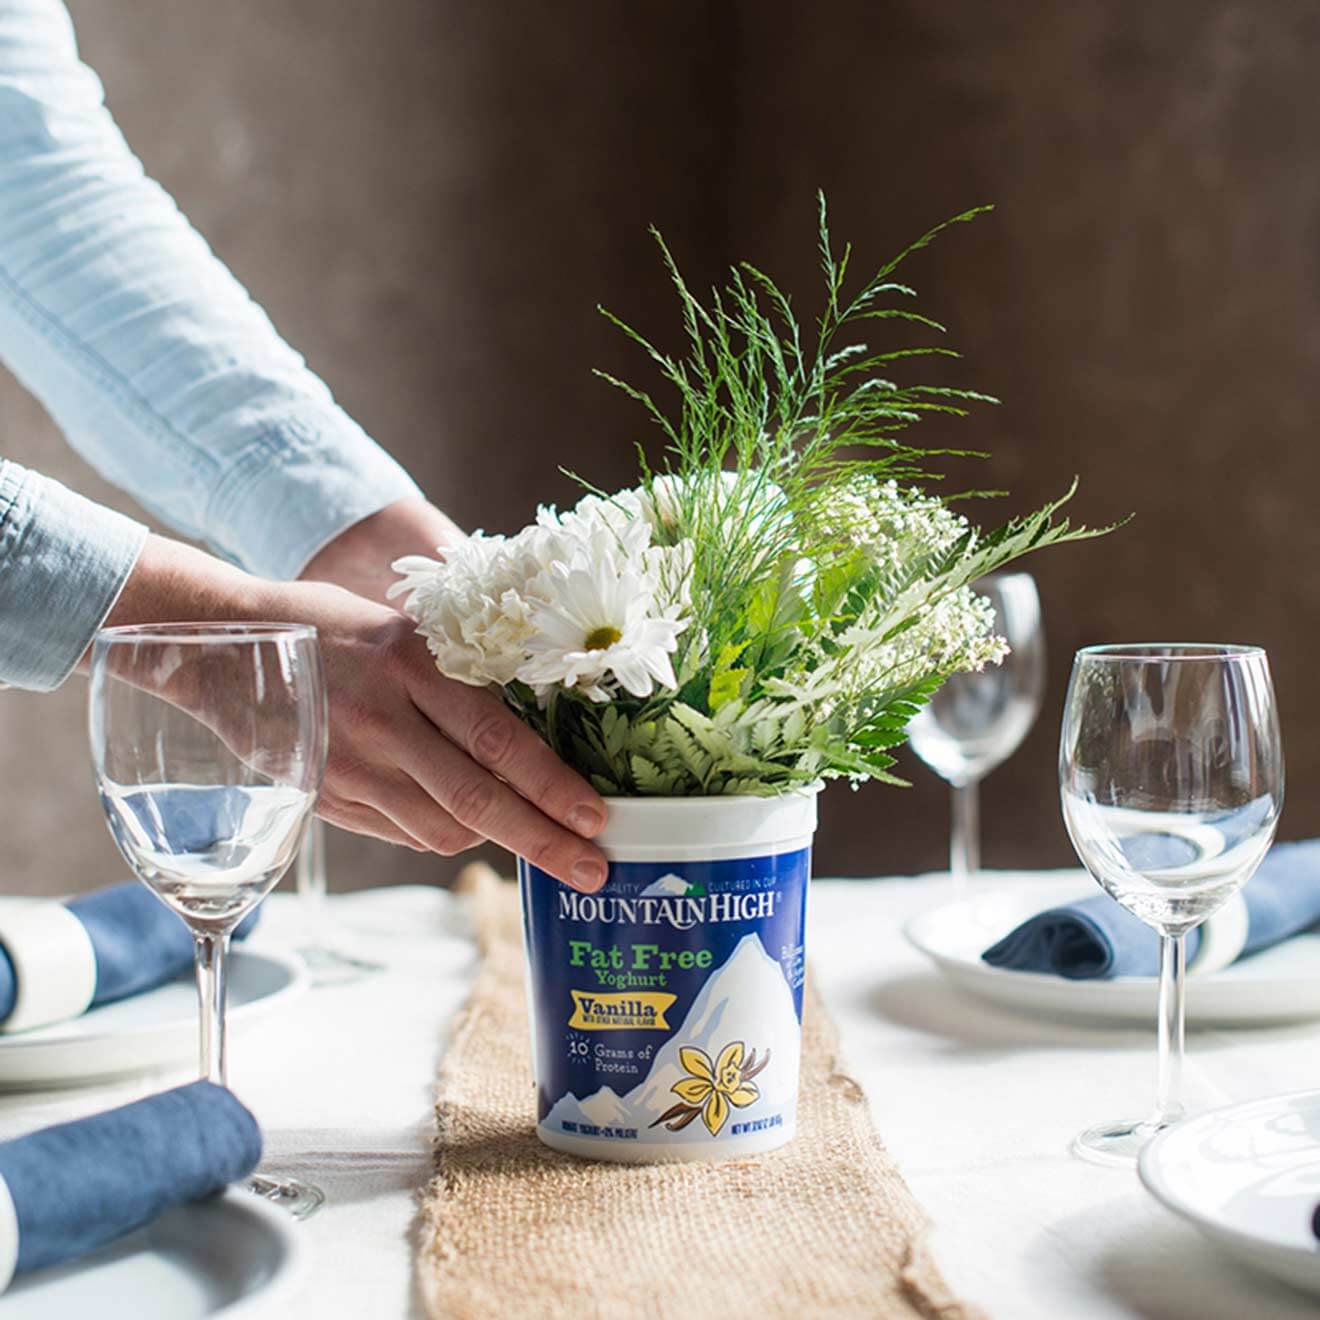 Hands placing a Mountain High Yoghurt container filled with white flowers on a table